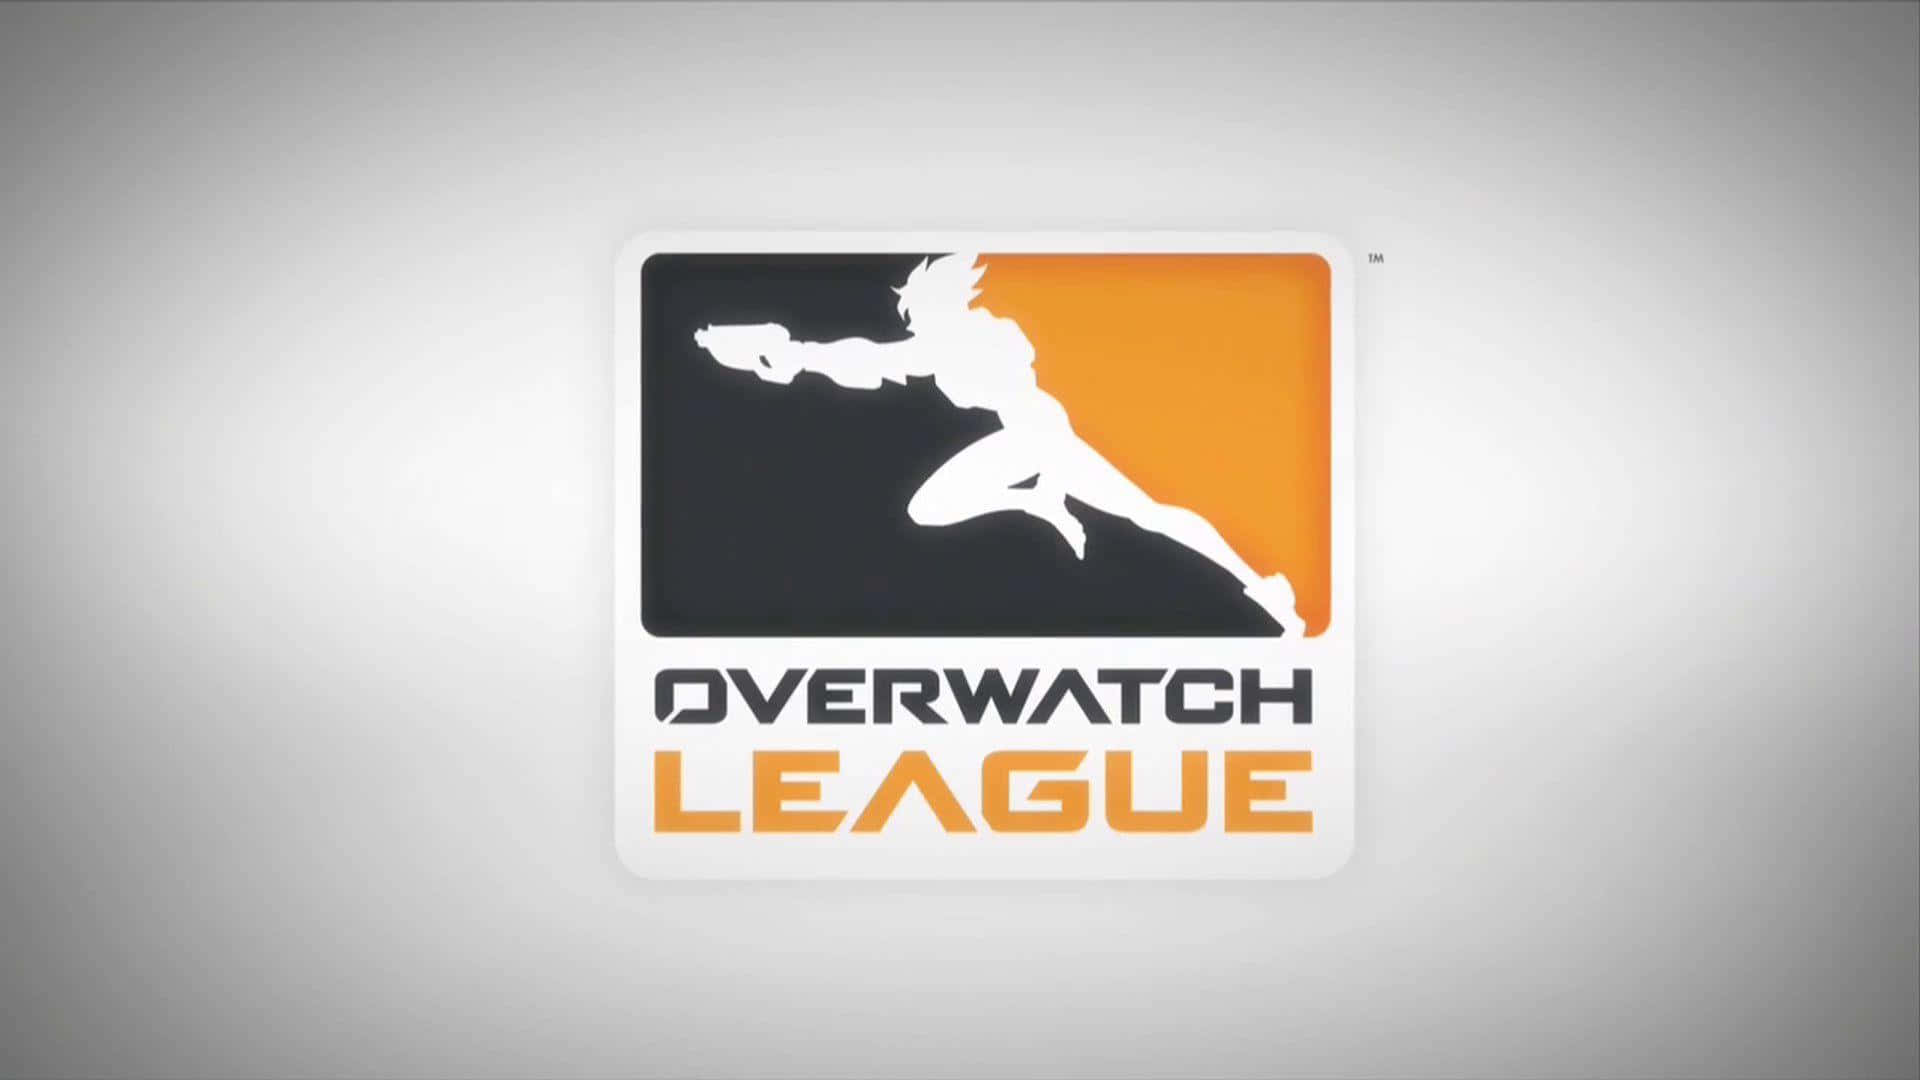 Exciting Overwatch League action with favorite heroes and teams Wallpaper